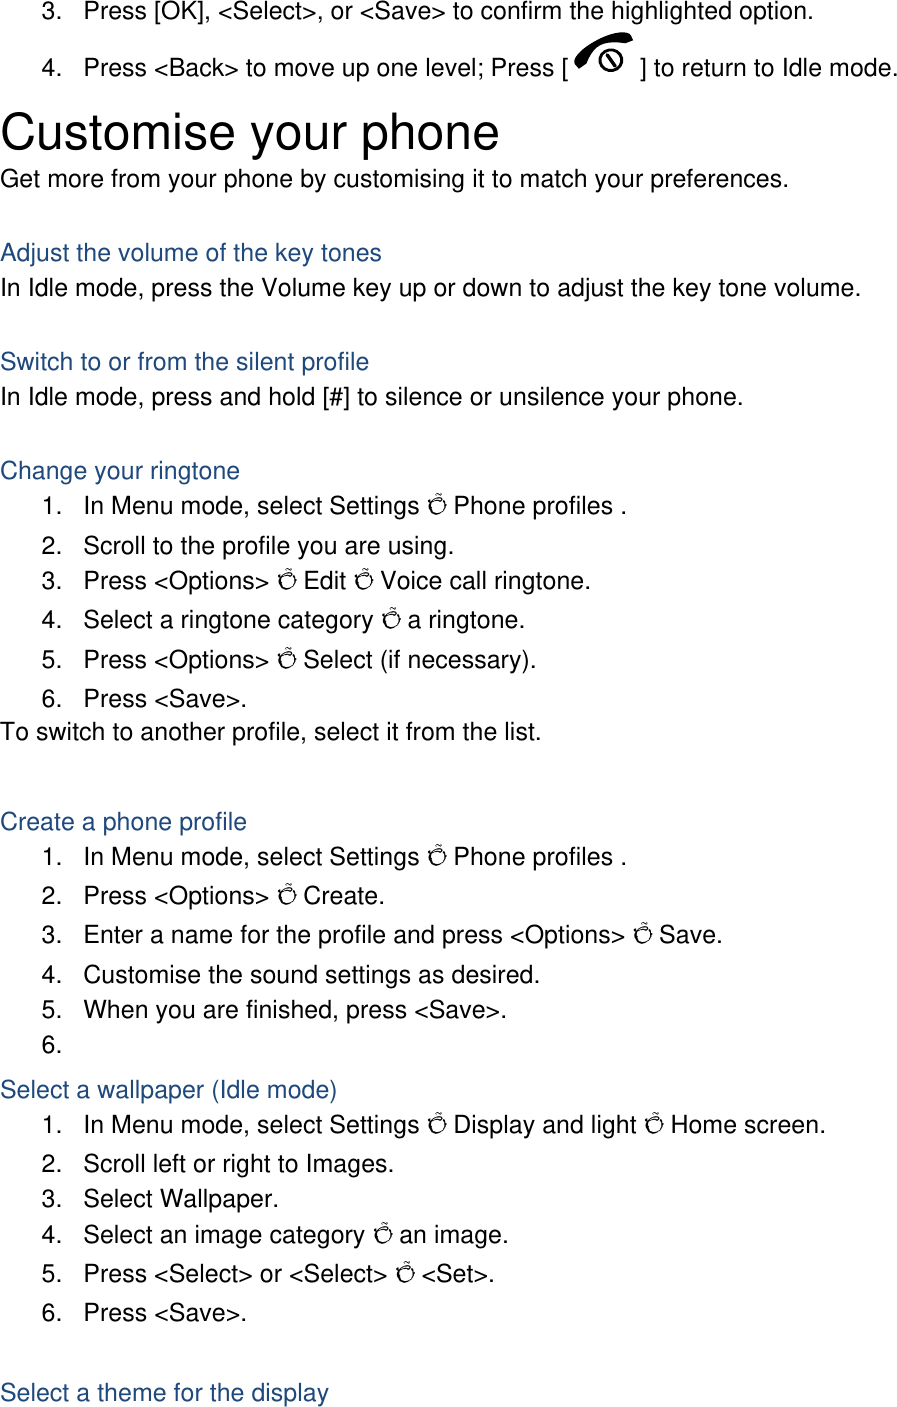 3.  Press [OK], &lt;Select&gt;, or &lt;Save&gt; to confirm the highlighted option. 4.  Press &lt;Back&gt; to move up one level; Press [ ] to return to Idle mode. Customise your phone Get more from your phone by customising it to match your preferences.  Adjust the volume of the key tones In Idle mode, press the Volume key up or down to adjust the key tone volume.  Switch to or from the silent profile In Idle mode, press and hold [#] to silence or unsilence your phone.  Change your ringtone 1.  In Menu mode, select Settings Õ Phone profiles . 2.  Scroll to the profile you are using. 3. Press &lt;Options&gt; Õ Edit Õ Voice call ringtone. 4.  Select a ringtone category Õ a ringtone. 5. Press &lt;Options&gt; Õ Select (if necessary). 6. Press &lt;Save&gt;. To switch to another profile, select it from the list.  Create a phone profile 1.  In Menu mode, select Settings Õ Phone profiles . 2. Press &lt;Options&gt; Õ Create. 3.  Enter a name for the profile and press &lt;Options&gt; Õ Save. 4.  Customise the sound settings as desired. 5.  When you are finished, press &lt;Save&gt;. 6.  Select a wallpaper (Idle mode) 1.  In Menu mode, select Settings Õ Display and light Õ Home screen. 2.  Scroll left or right to Images. 3. Select Wallpaper. 4.  Select an image category Õ an image. 5.  Press &lt;Select&gt; or &lt;Select&gt; Õ &lt;Set&gt;. 6. Press &lt;Save&gt;.  Select a theme for the display 